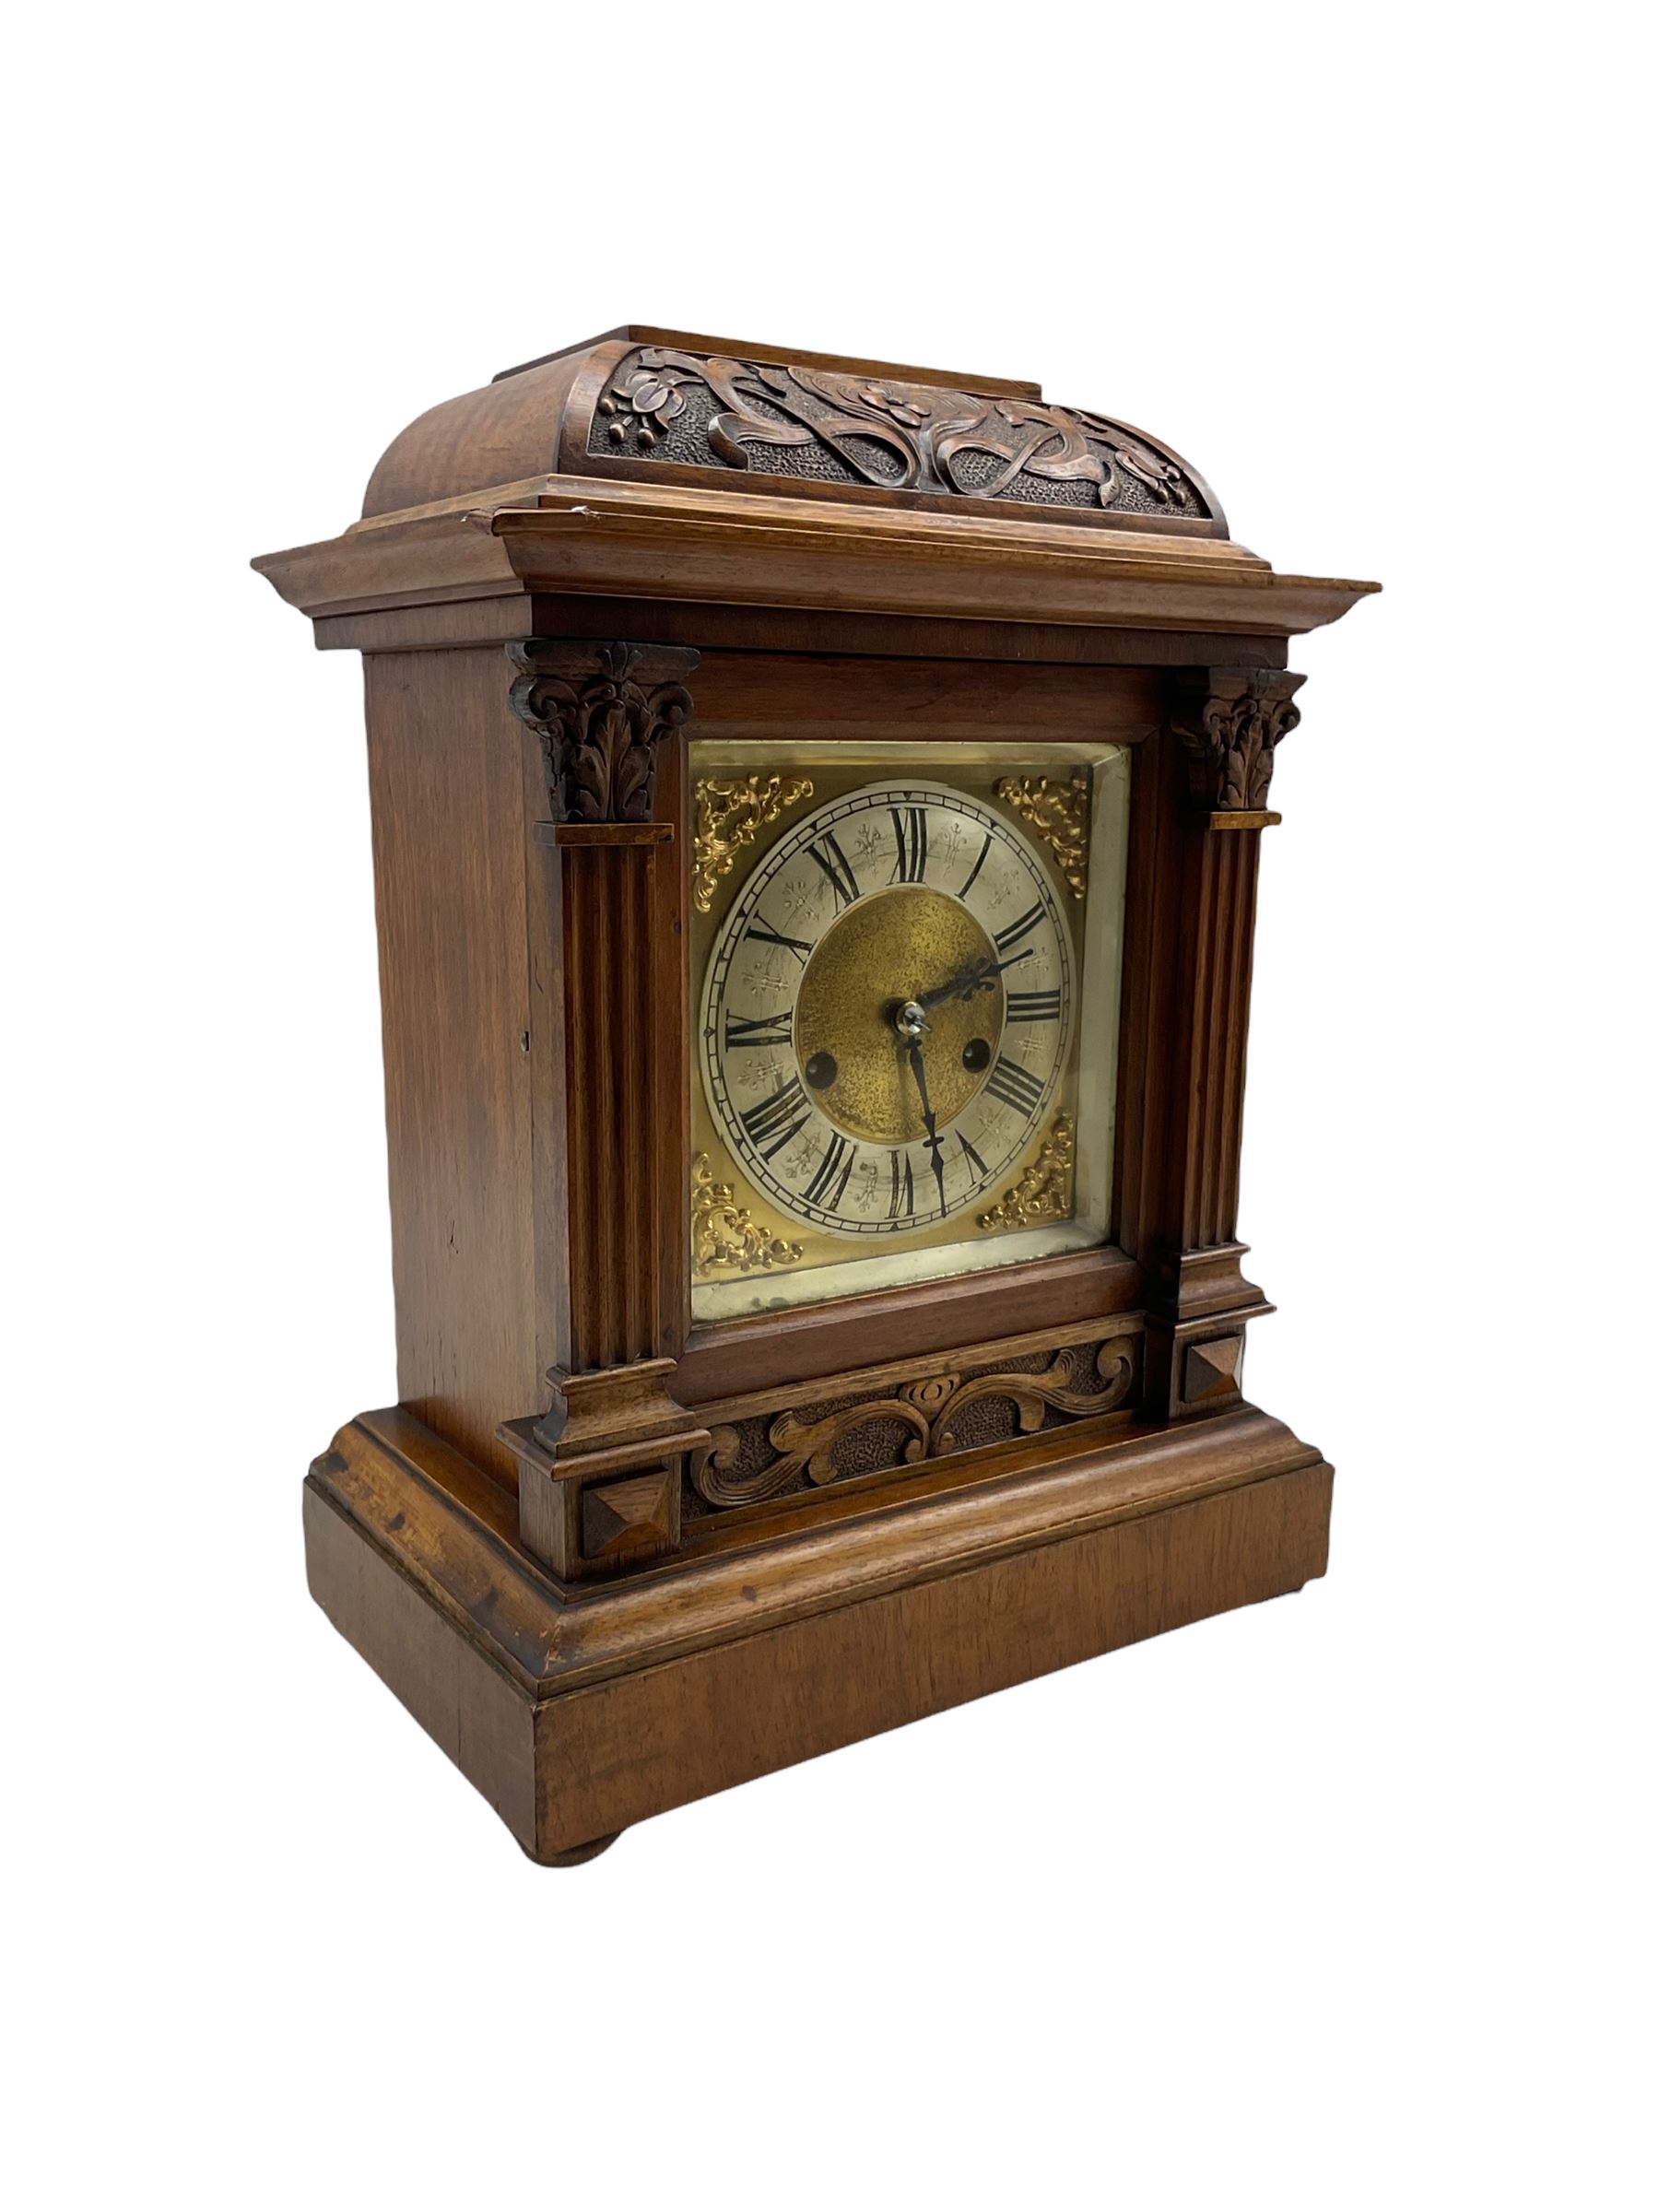 A German mantle clock in an oak case manufactured by HAC (Hamburg American Clock Company) c 1890 - Image 2 of 3